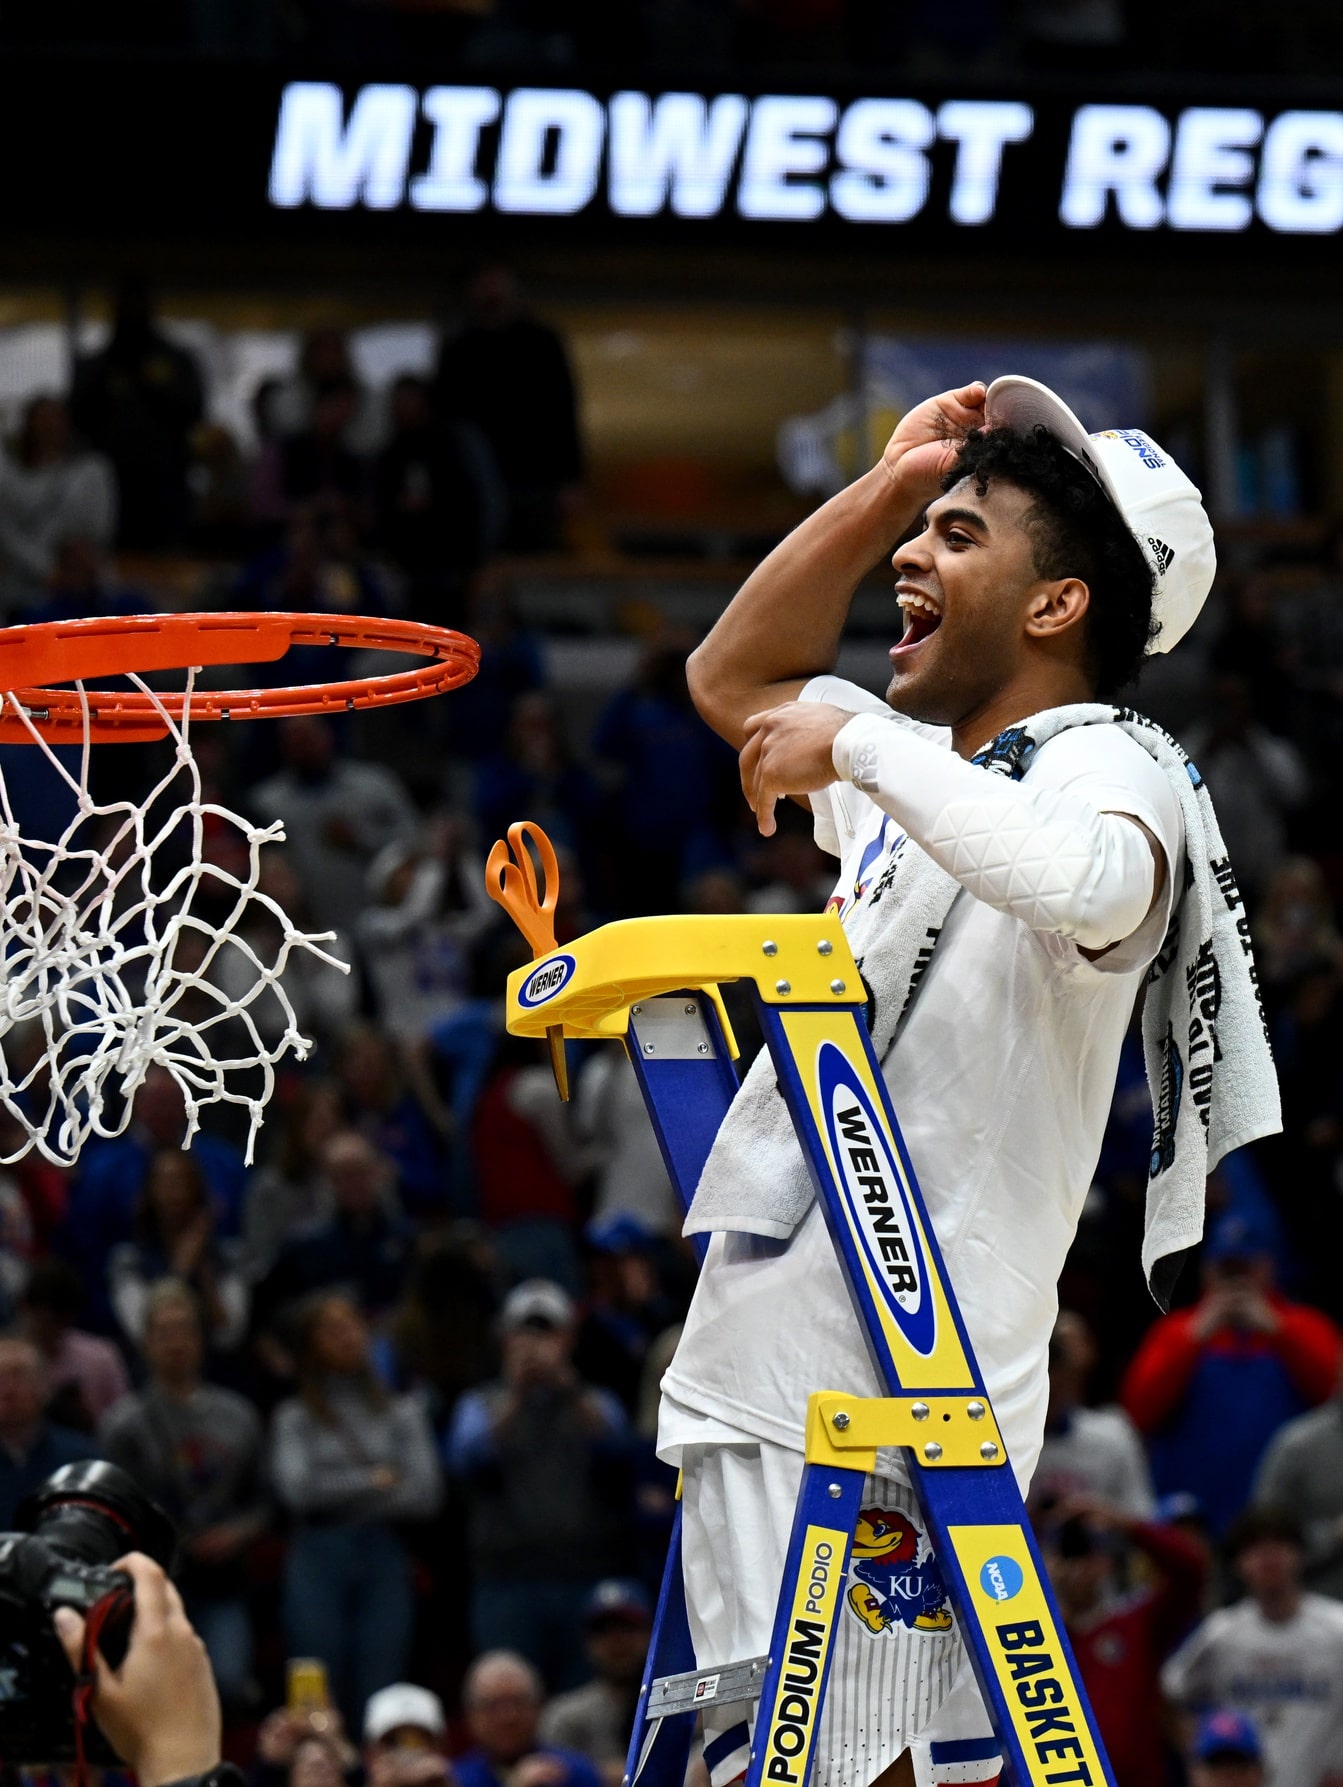 Mar 27, 2022; Chicago, IL, USA; Kansas Jayhawks guard Remy Martin (11) cuts down the nets after advancing to the Final Four by defeating the Miami Hurricanes 76-50 in the finals of the Midwest regional of the men's college basketball NCAA Tournament at United Center.